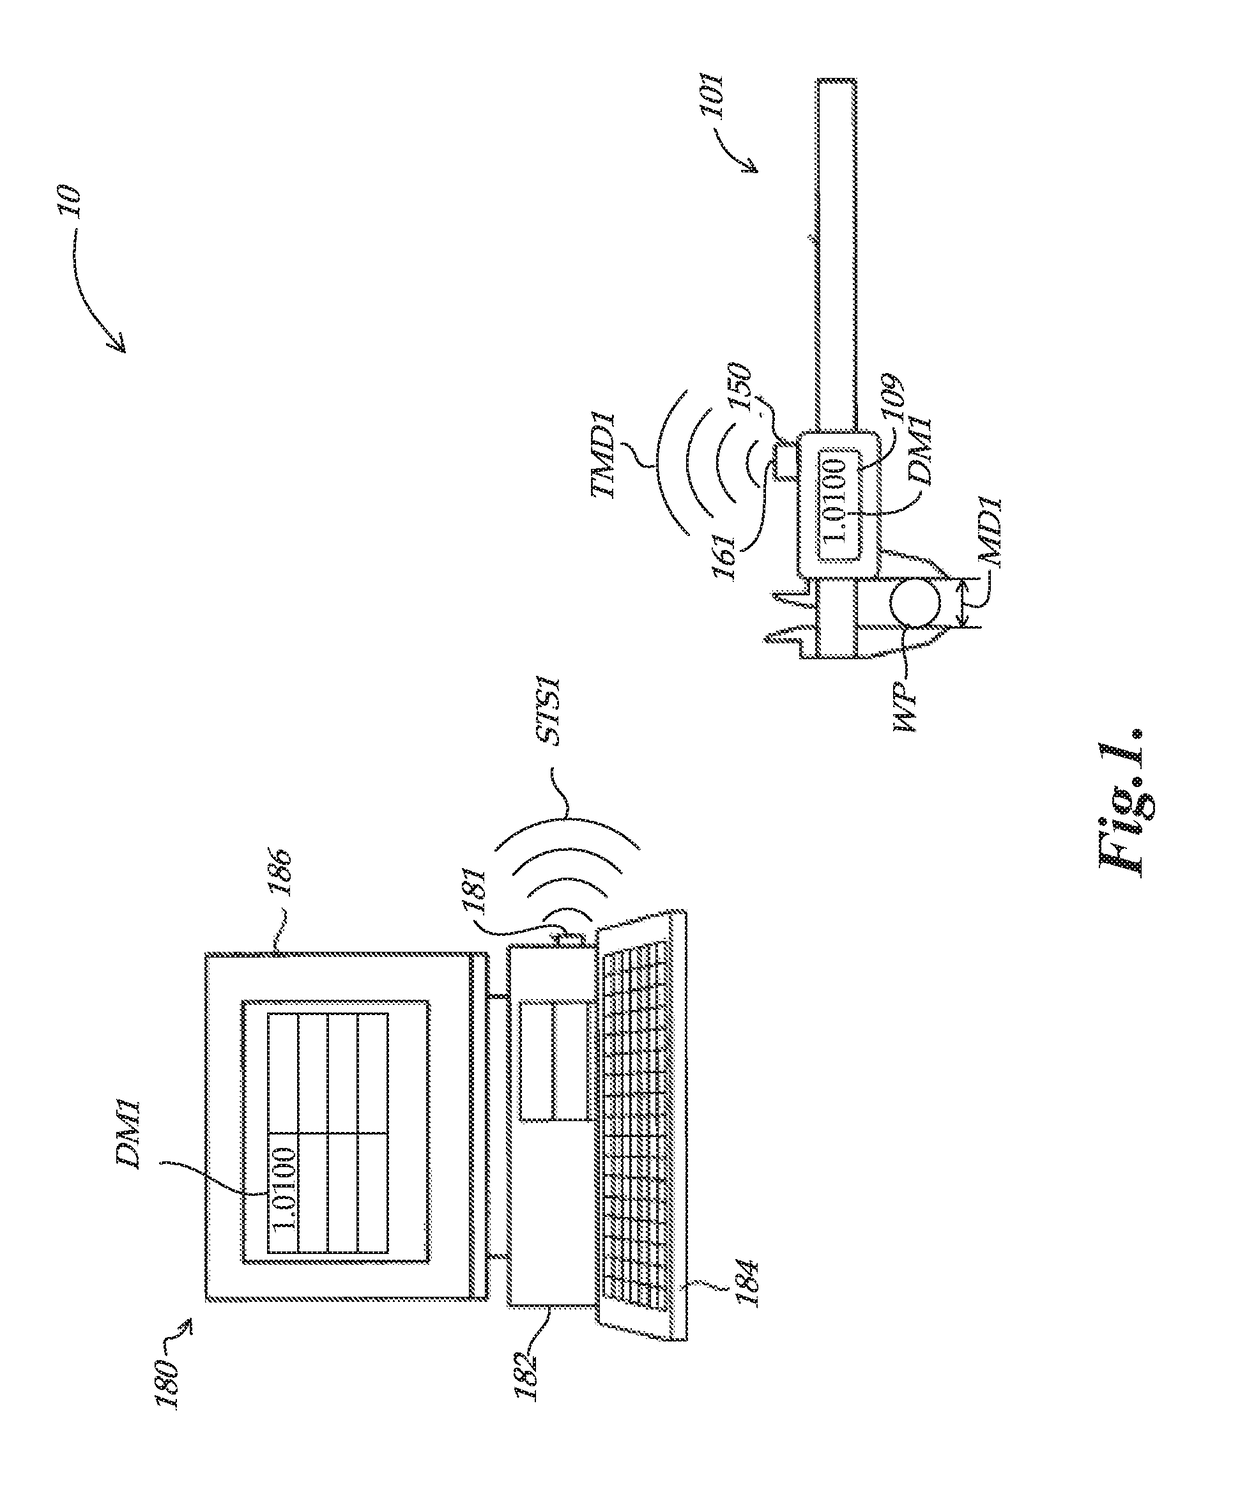 Battery-less data transmission module accessory for portable and handheld metrology devices